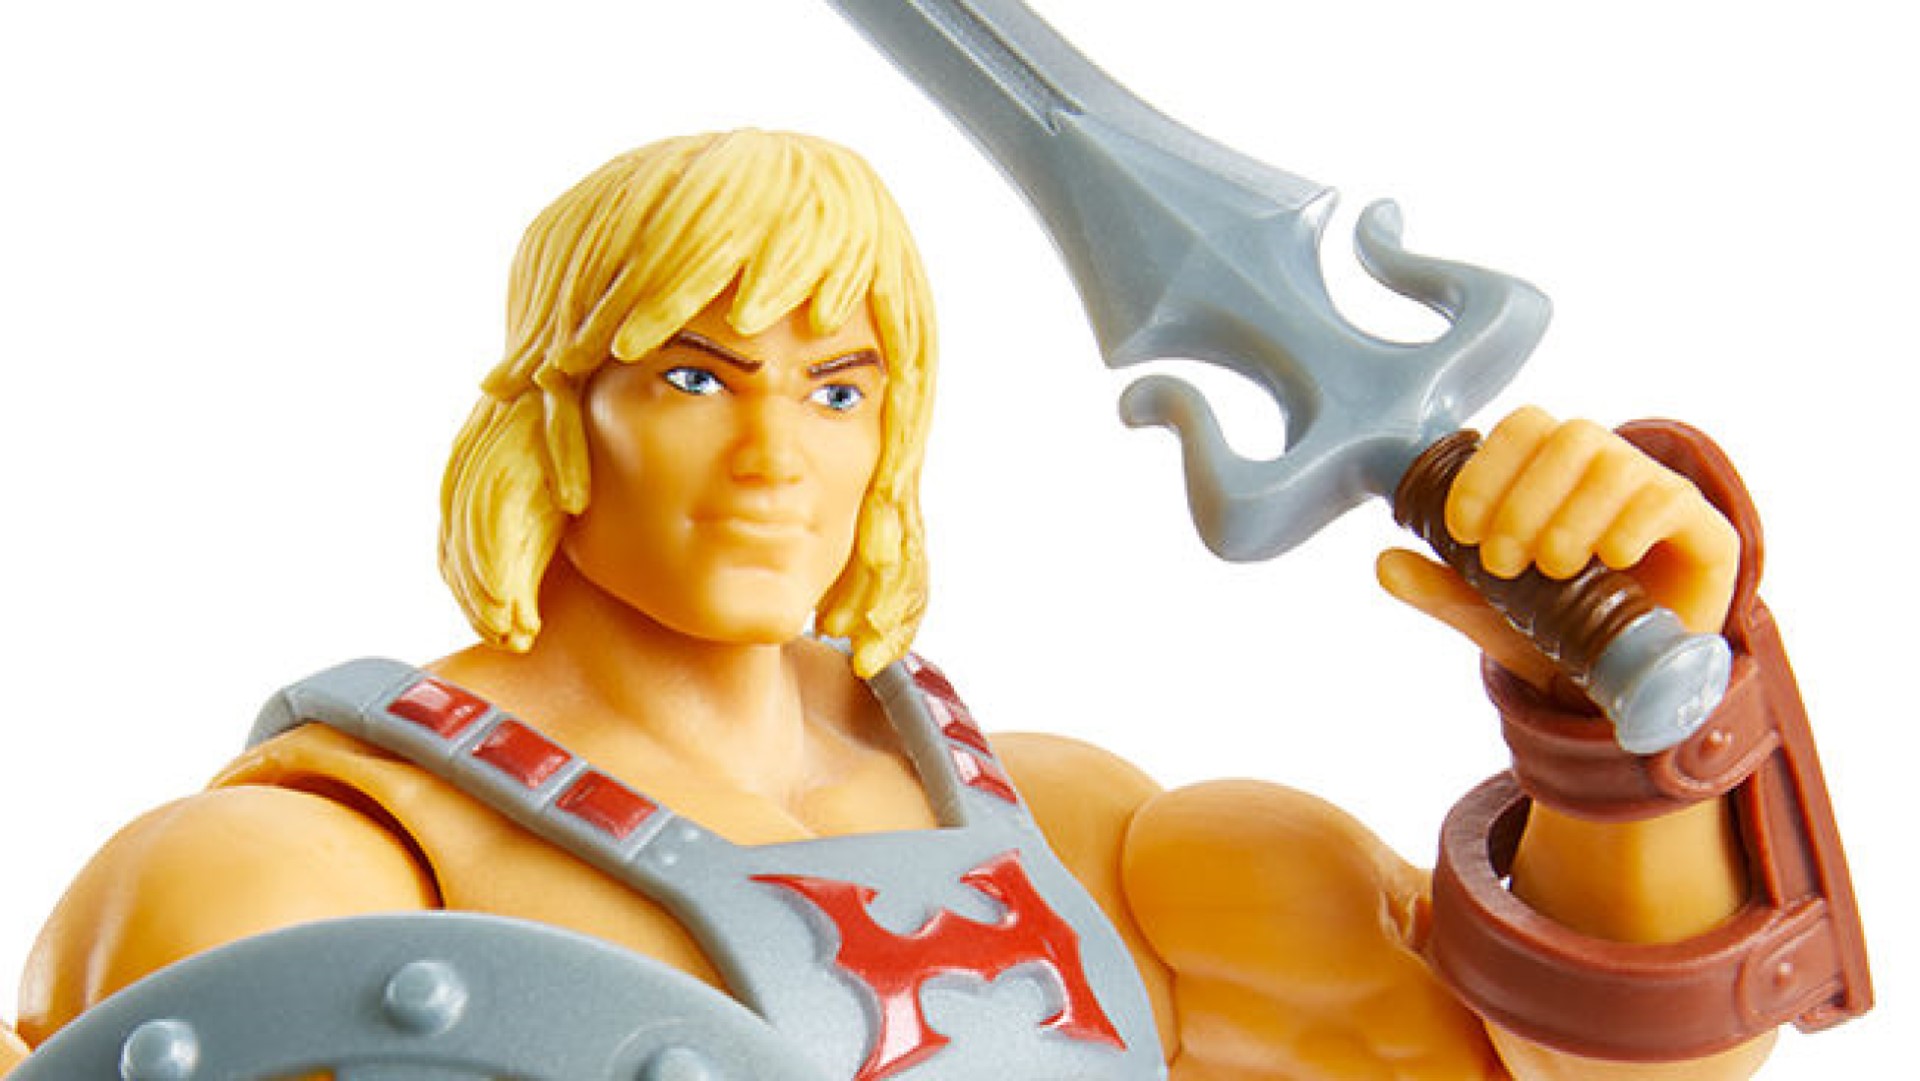 Fall Guys is adding Netflix's Masters of the Universe to the game